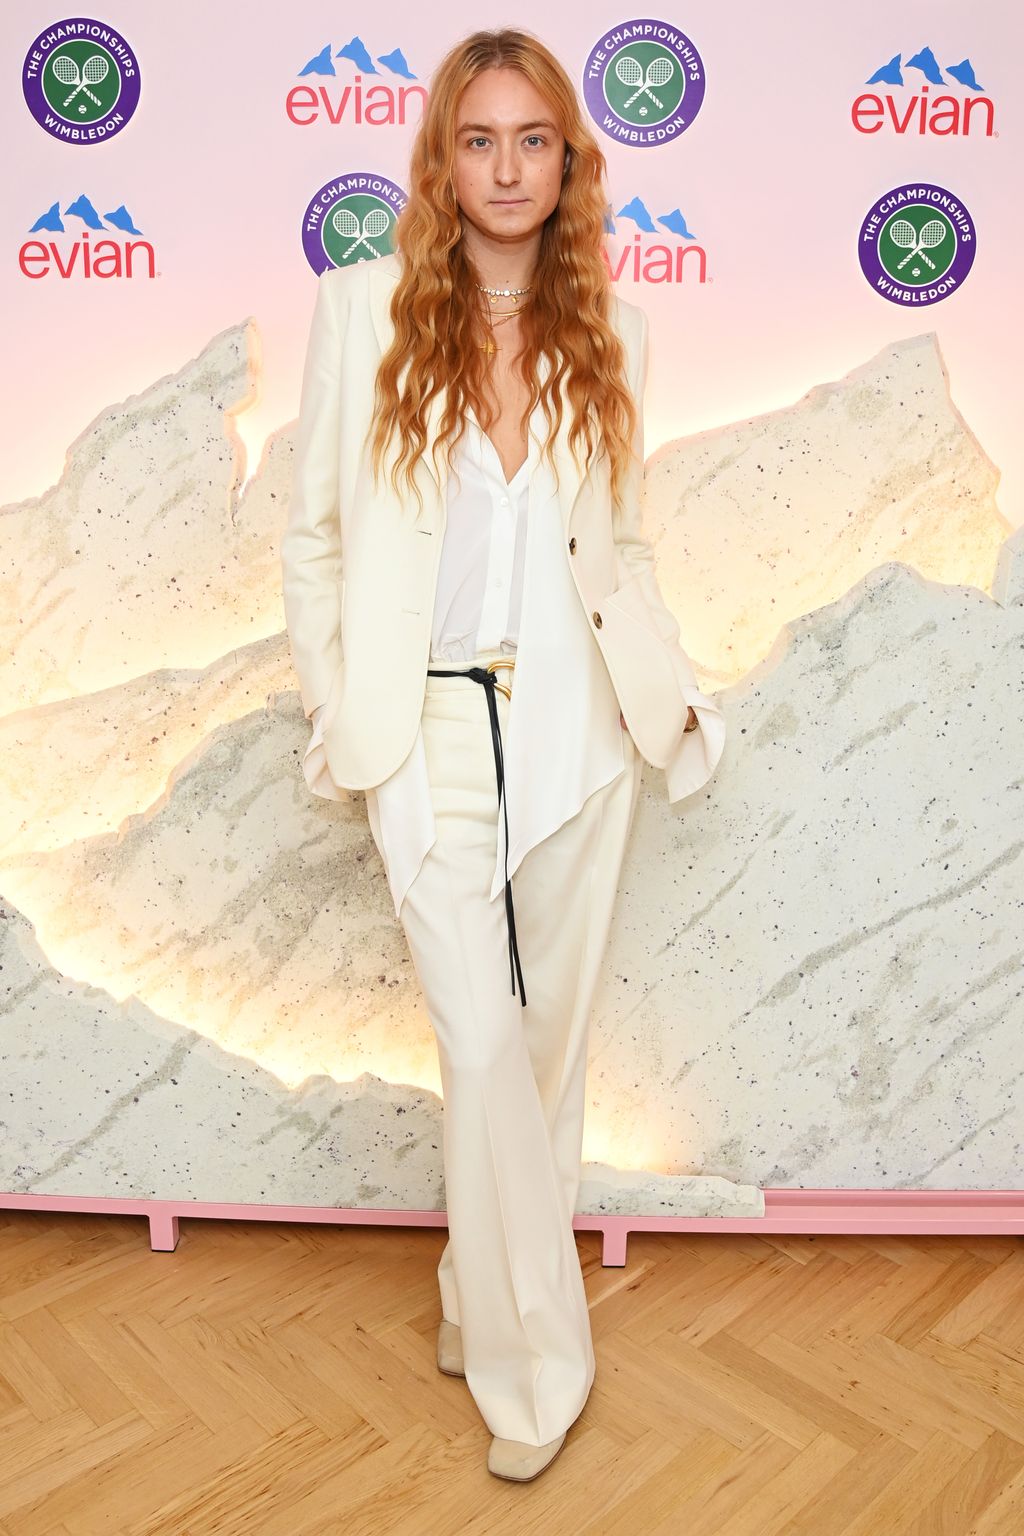 Fashion designer Harris Reed wore a chic cream suit with an asymmetricsal shirt and a draping waist belt